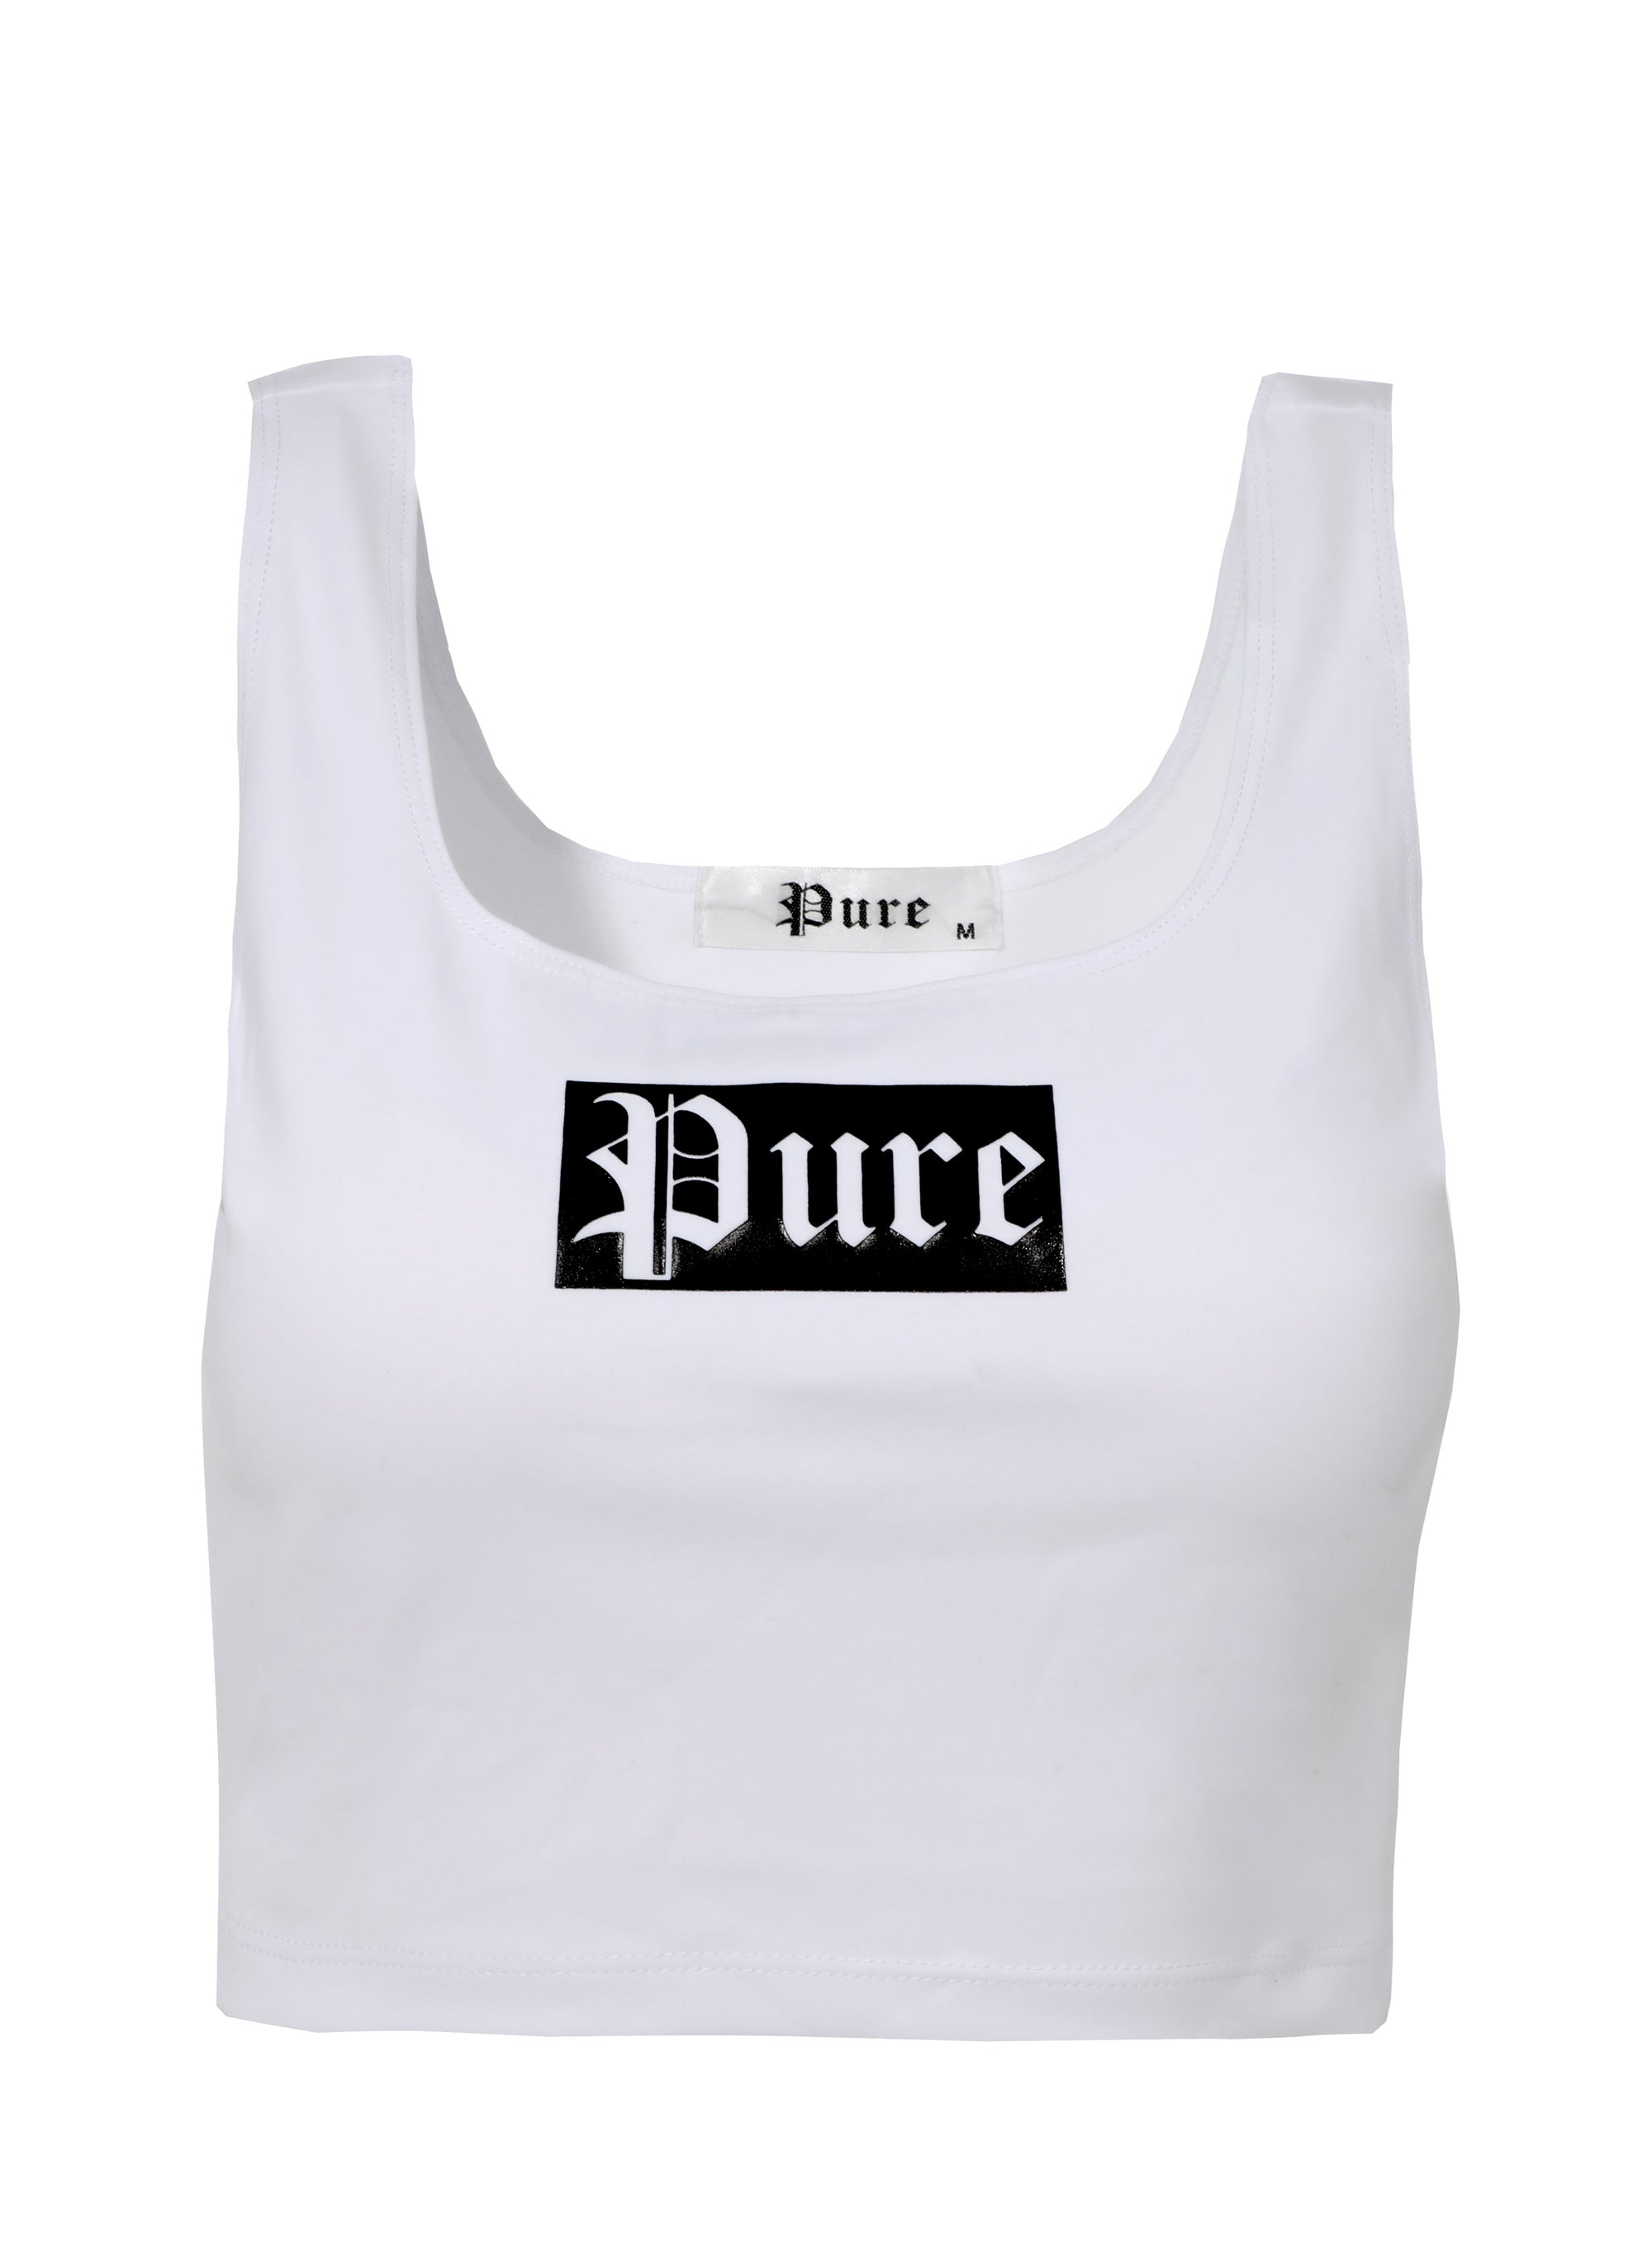 WOMEN'S PURE CROPPED TANK TOP - WHITE